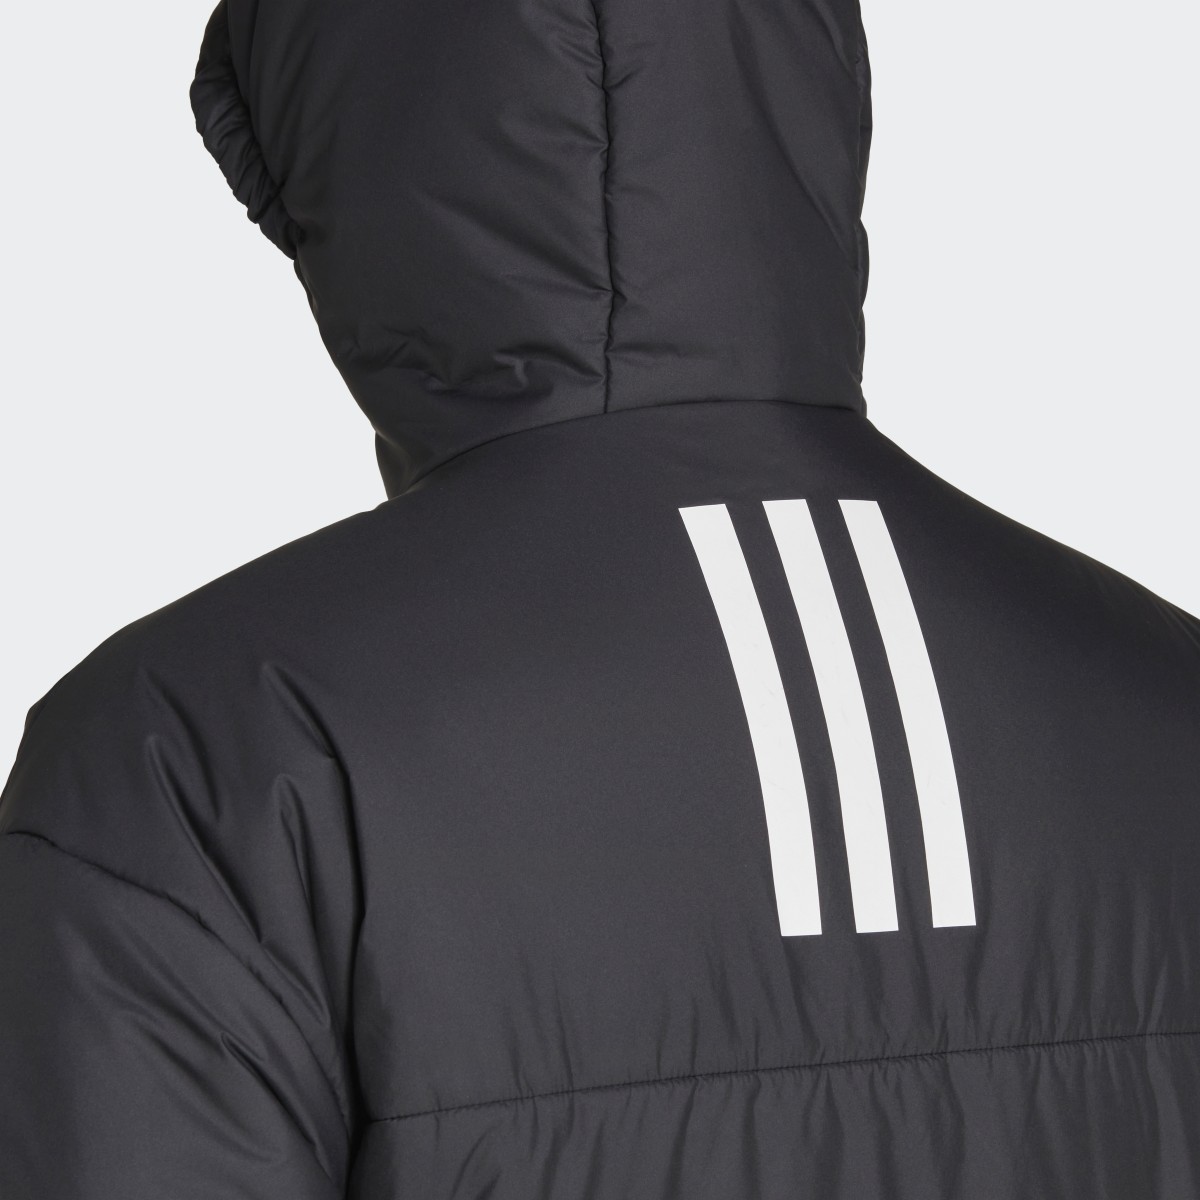 Adidas BSC 3-Stripes Puffy Hooded Jacket. 9